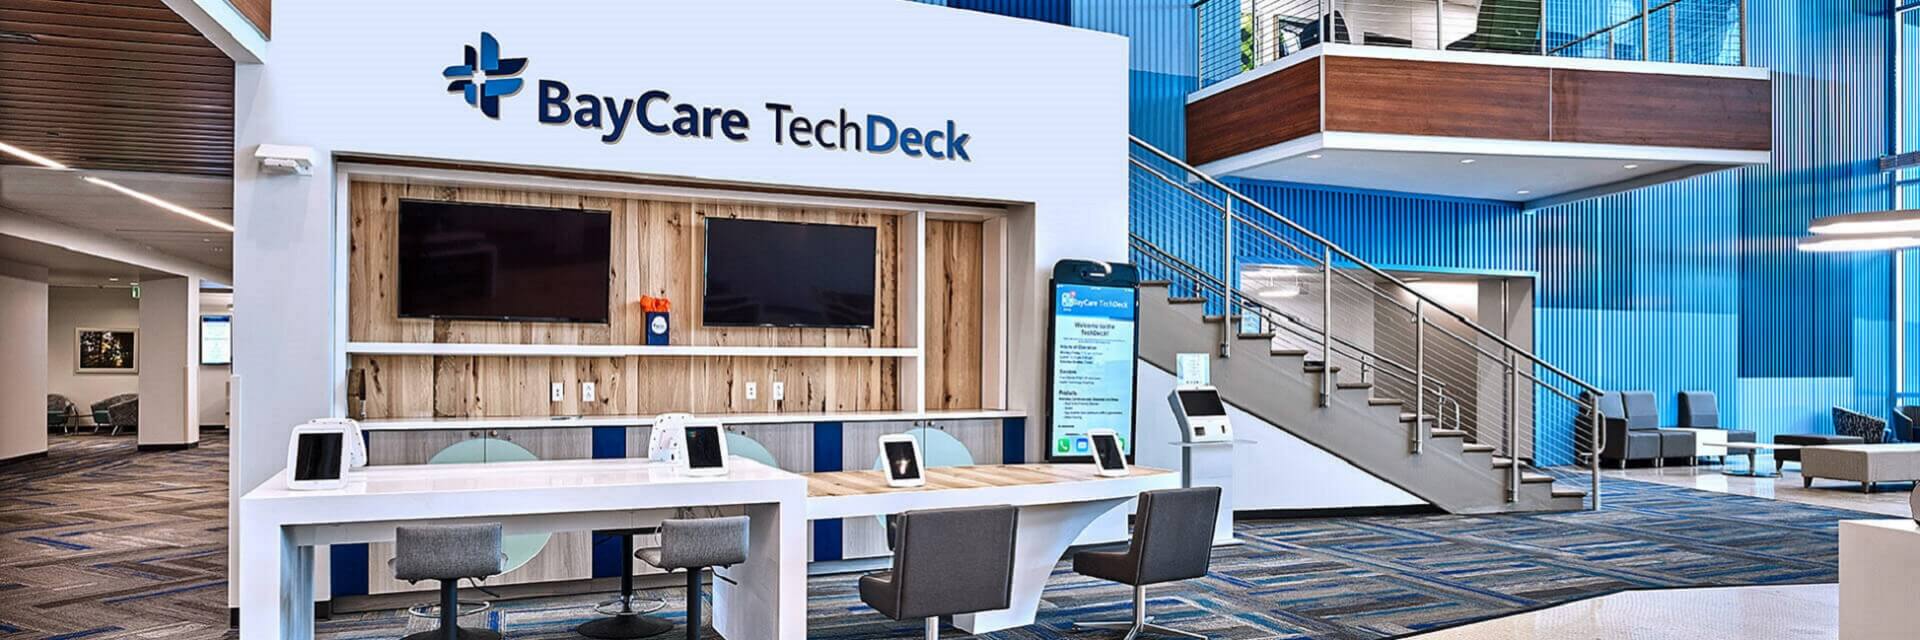 baycare techdeck center at bloomingdale